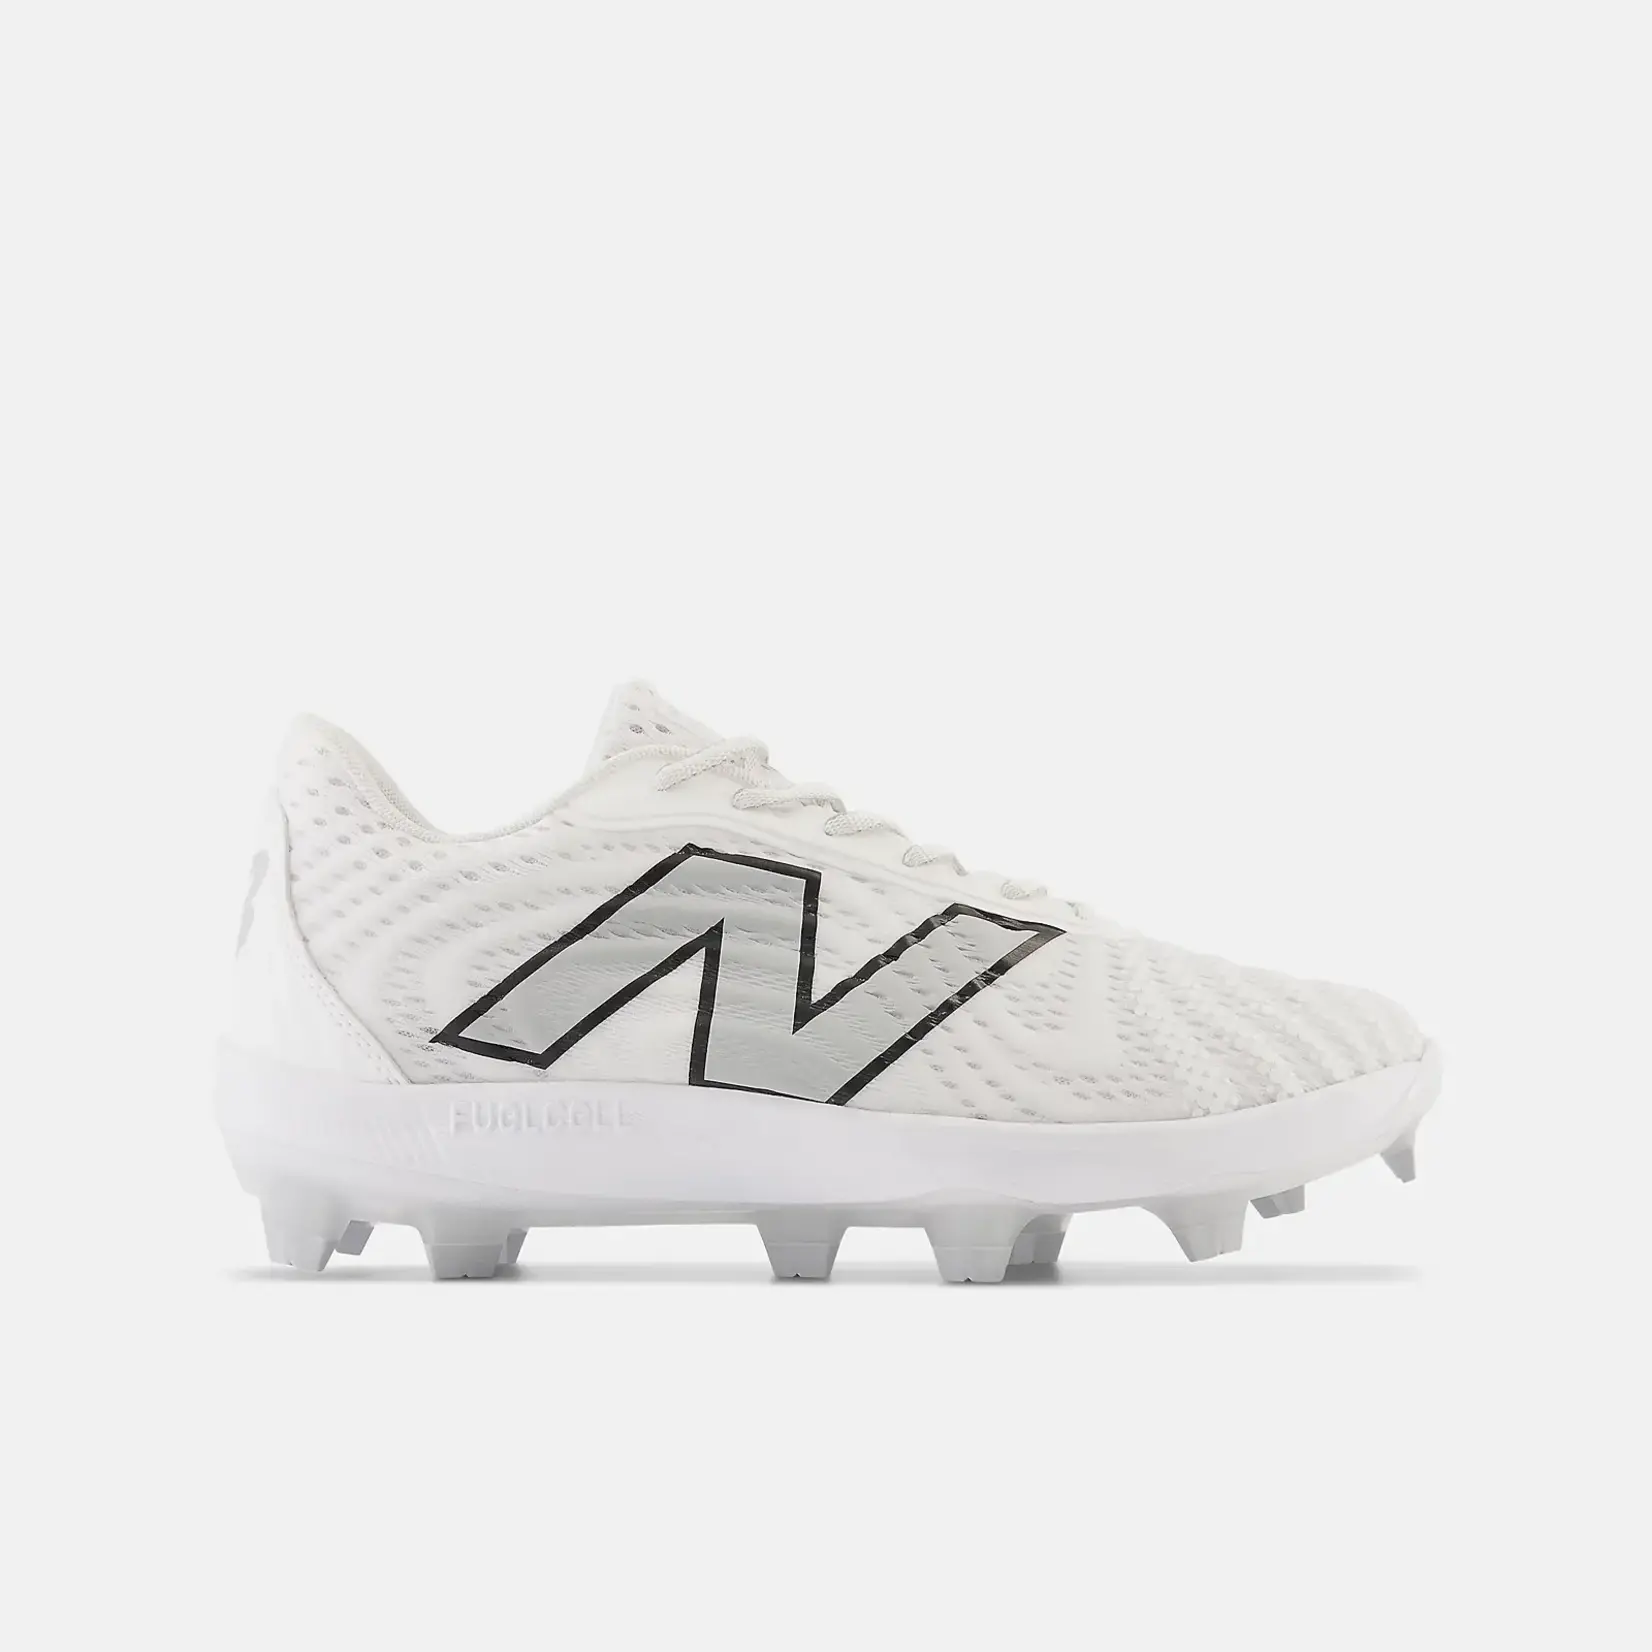 New Balance FuelCell 4040 v7 Molded